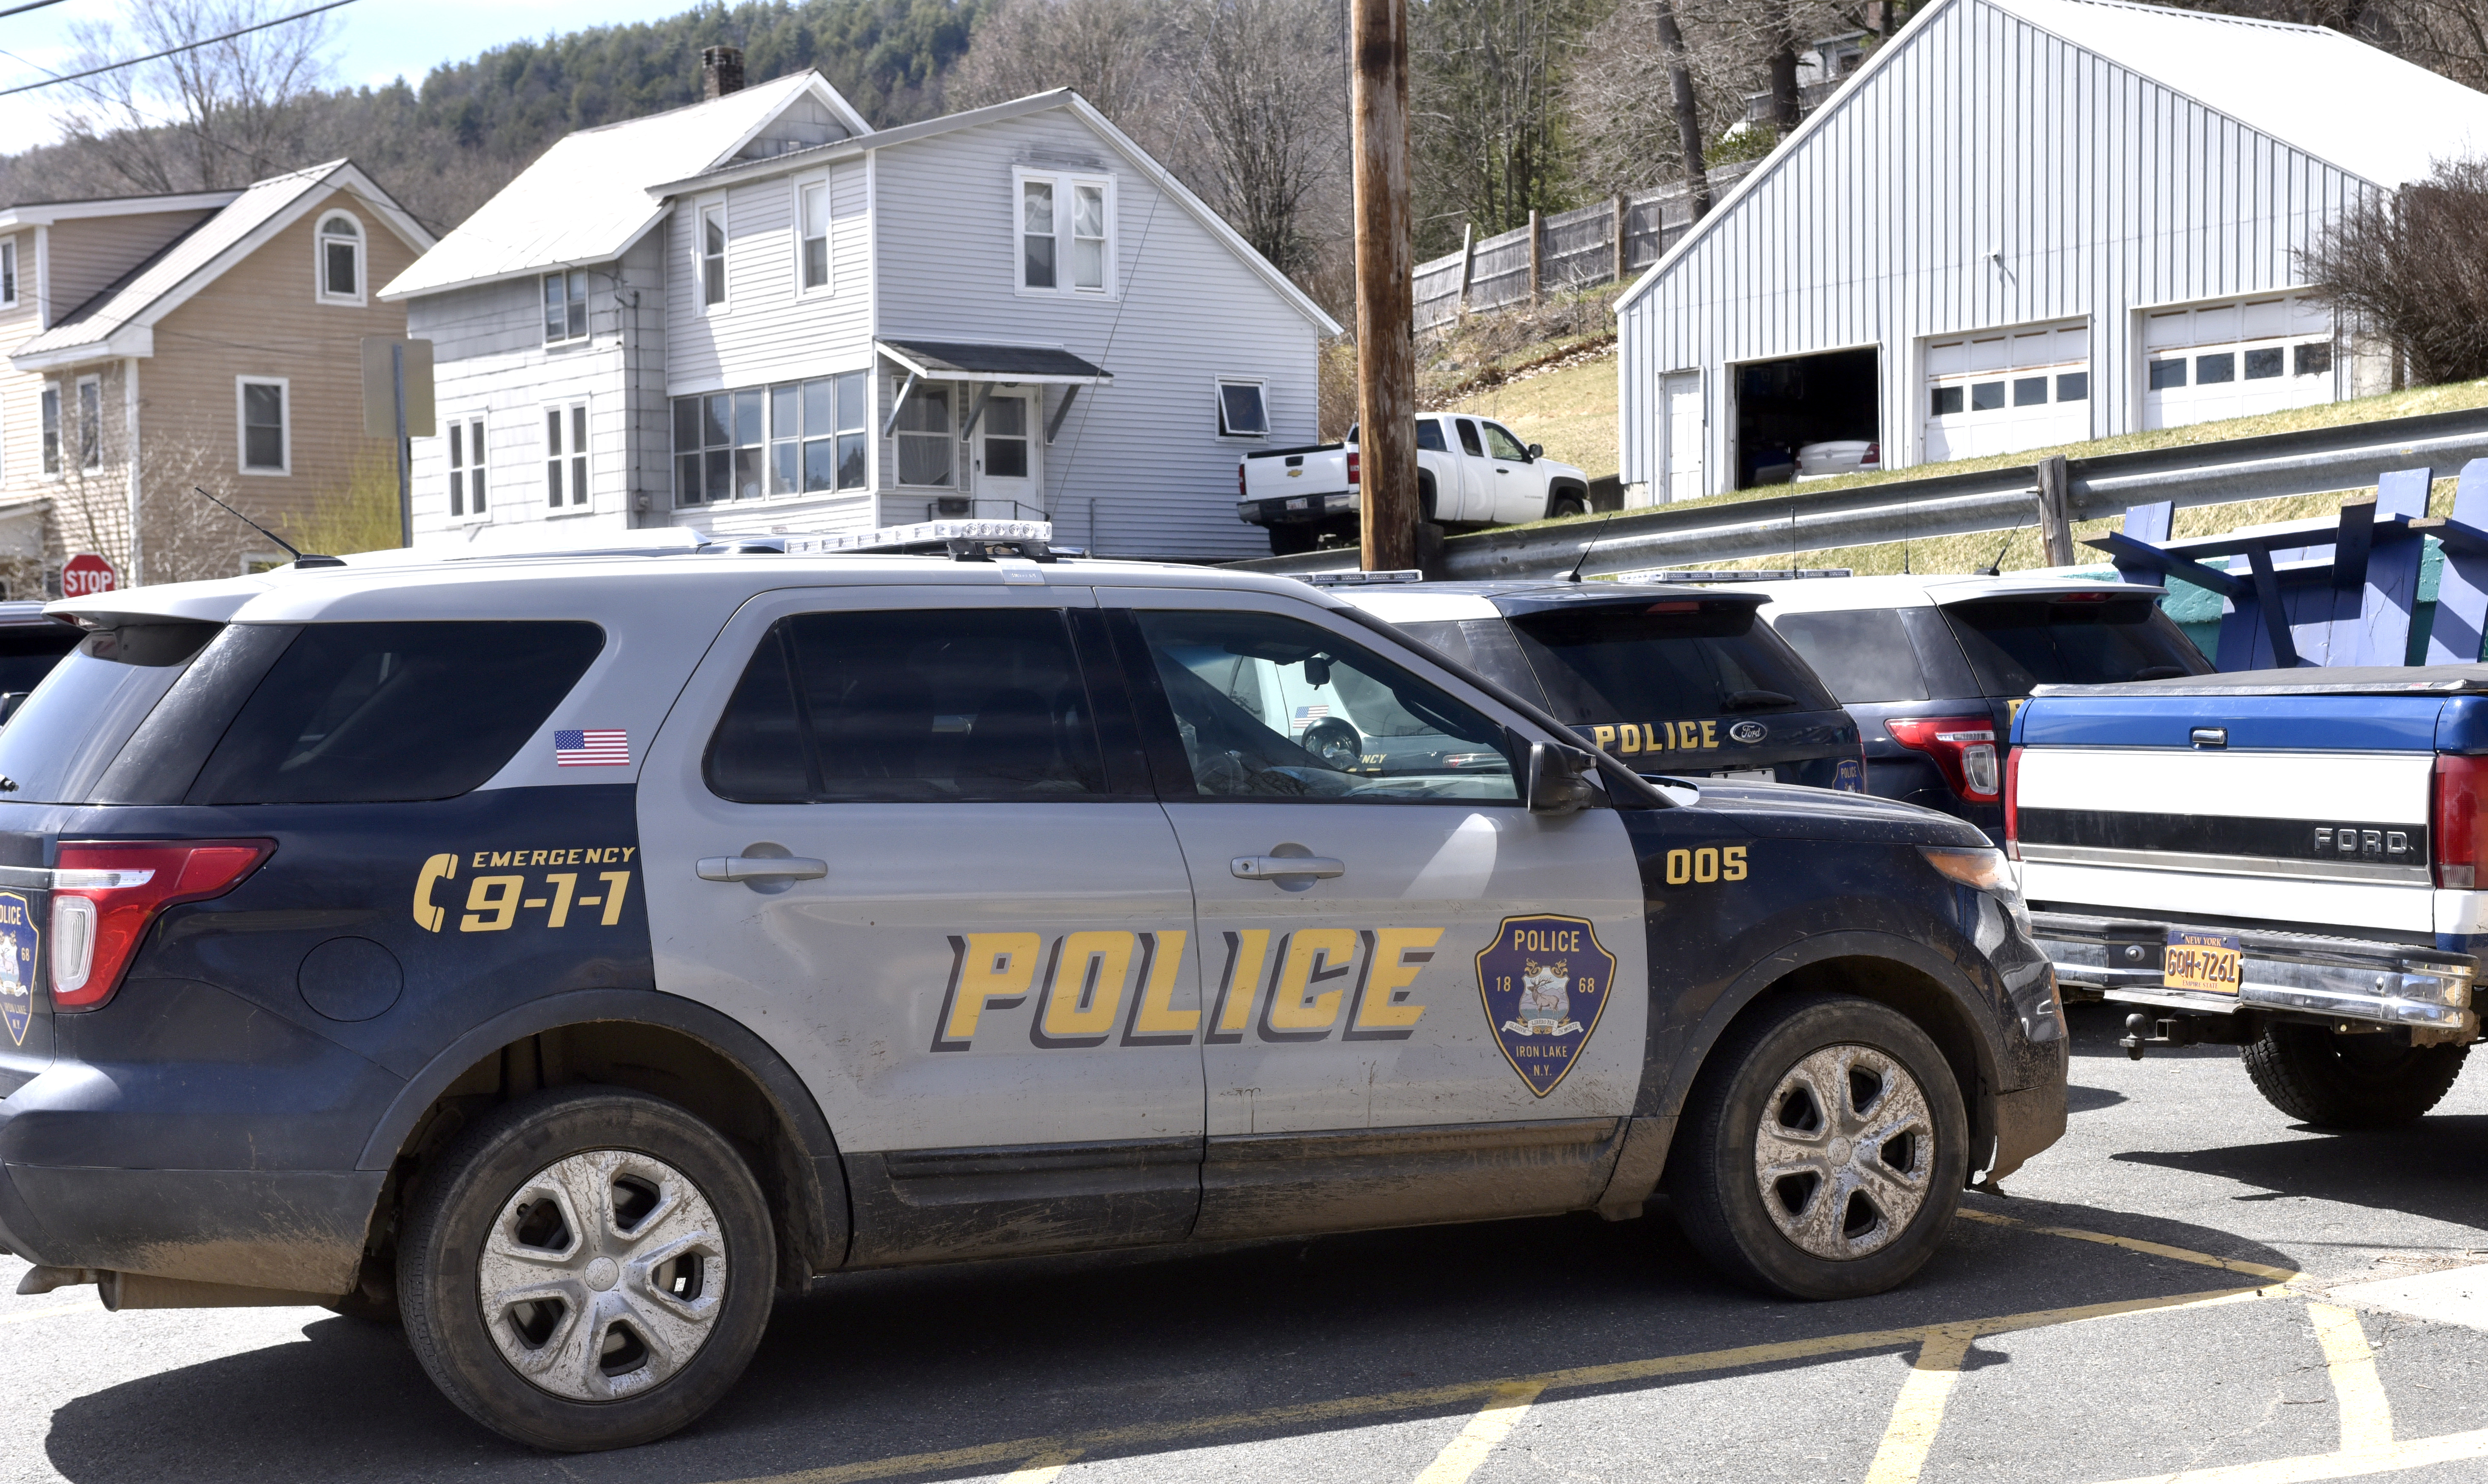 Vehicles from the fictional town of Iron Lake, New York sit in a lot on State Street in Shelburne Falls. The cars are being used in the series Dexter, now filming in downtown Shelburne Falls, April 7, 2021.   (Don Treeger / The Republican)